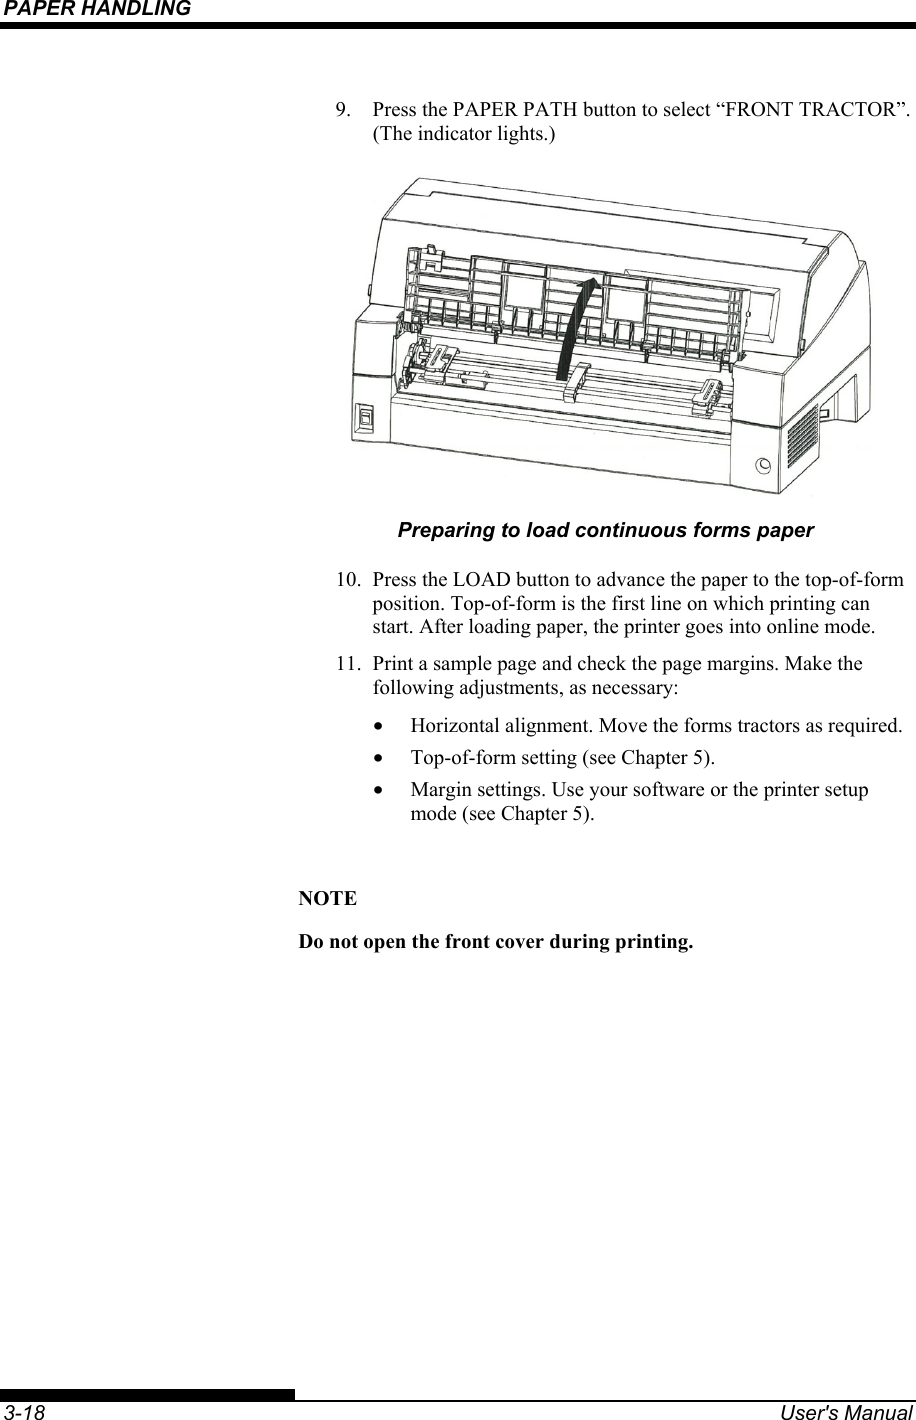 PAPER HANDLING    3-18  User&apos;s Manual 9.  Press the PAPER PATH button to select “FRONT TRACTOR”. (The indicator lights.)  Preparing to load continuous forms paper 10.  Press the LOAD button to advance the paper to the top-of-form position. Top-of-form is the first line on which printing can start. After loading paper, the printer goes into online mode. 11.  Print a sample page and check the page margins. Make the following adjustments, as necessary: •  Horizontal alignment. Move the forms tractors as required. •  Top-of-form setting (see Chapter 5). •  Margin settings. Use your software or the printer setup mode (see Chapter 5).  NOTE Do not open the front cover during printing. 